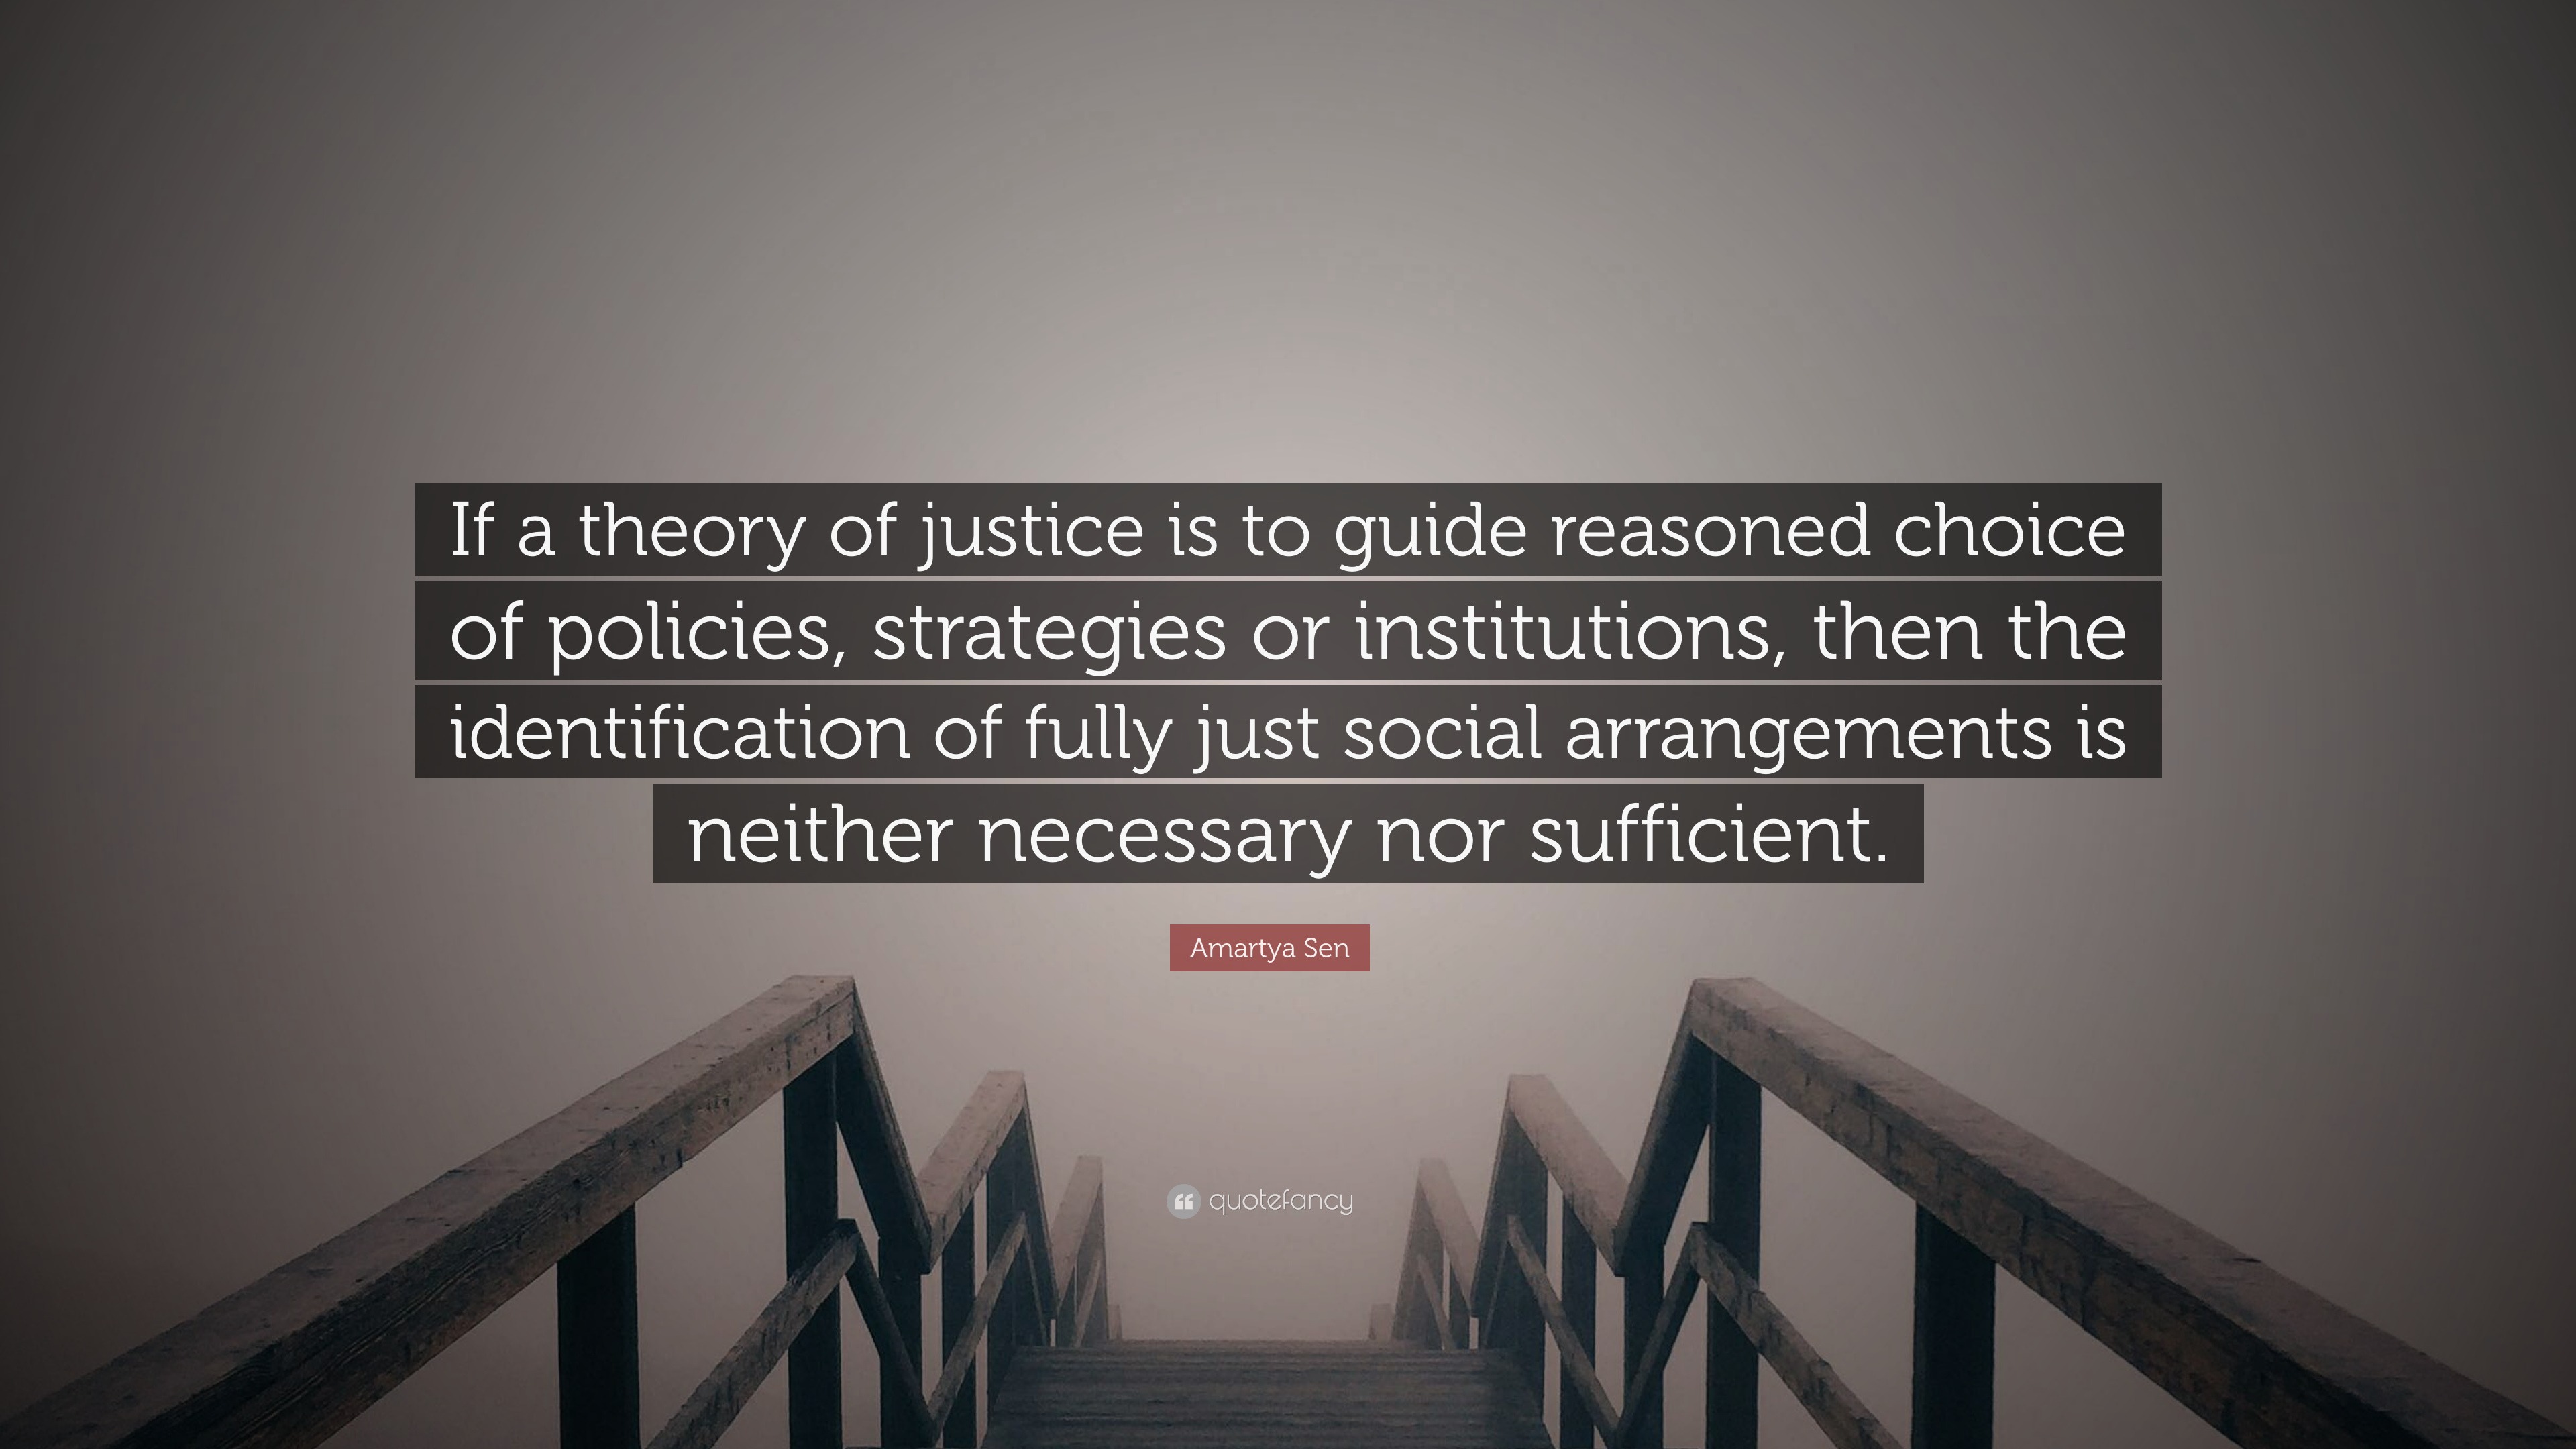 Amartya Sen Quote If A Theory Of Justice Is To Guide Reasoned Choice Of Policies Strategies Or Institutions Then The Identification Of F